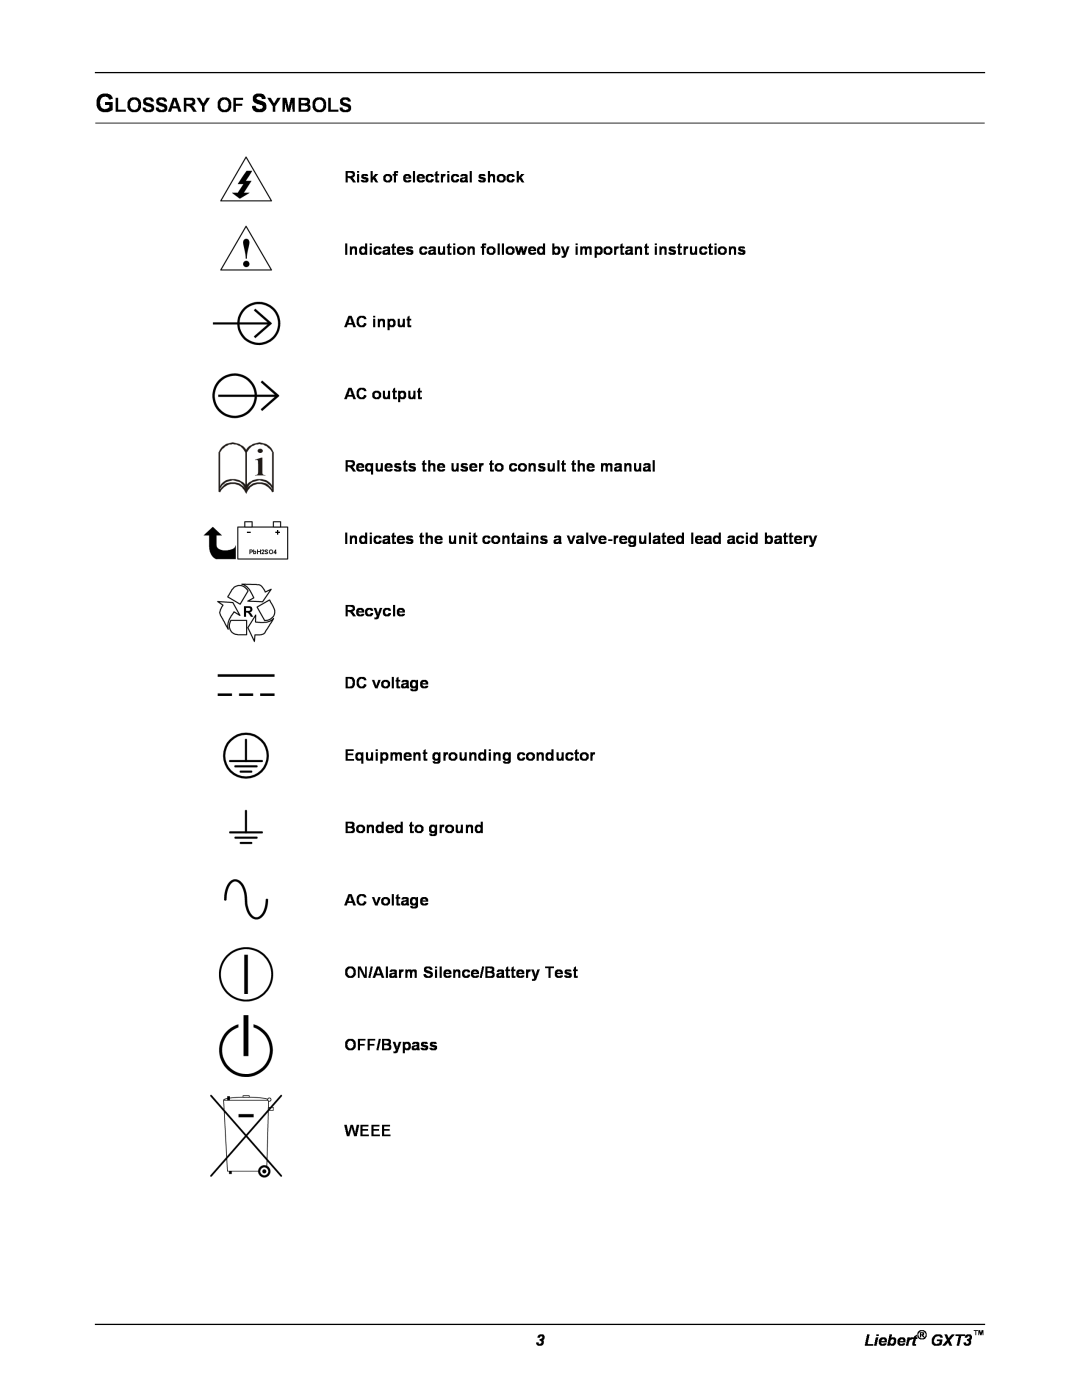 Liebert GXT3 Glossary Of Symbols, Risk of electrical shock, Indicates caution followed by important instructions AC input 